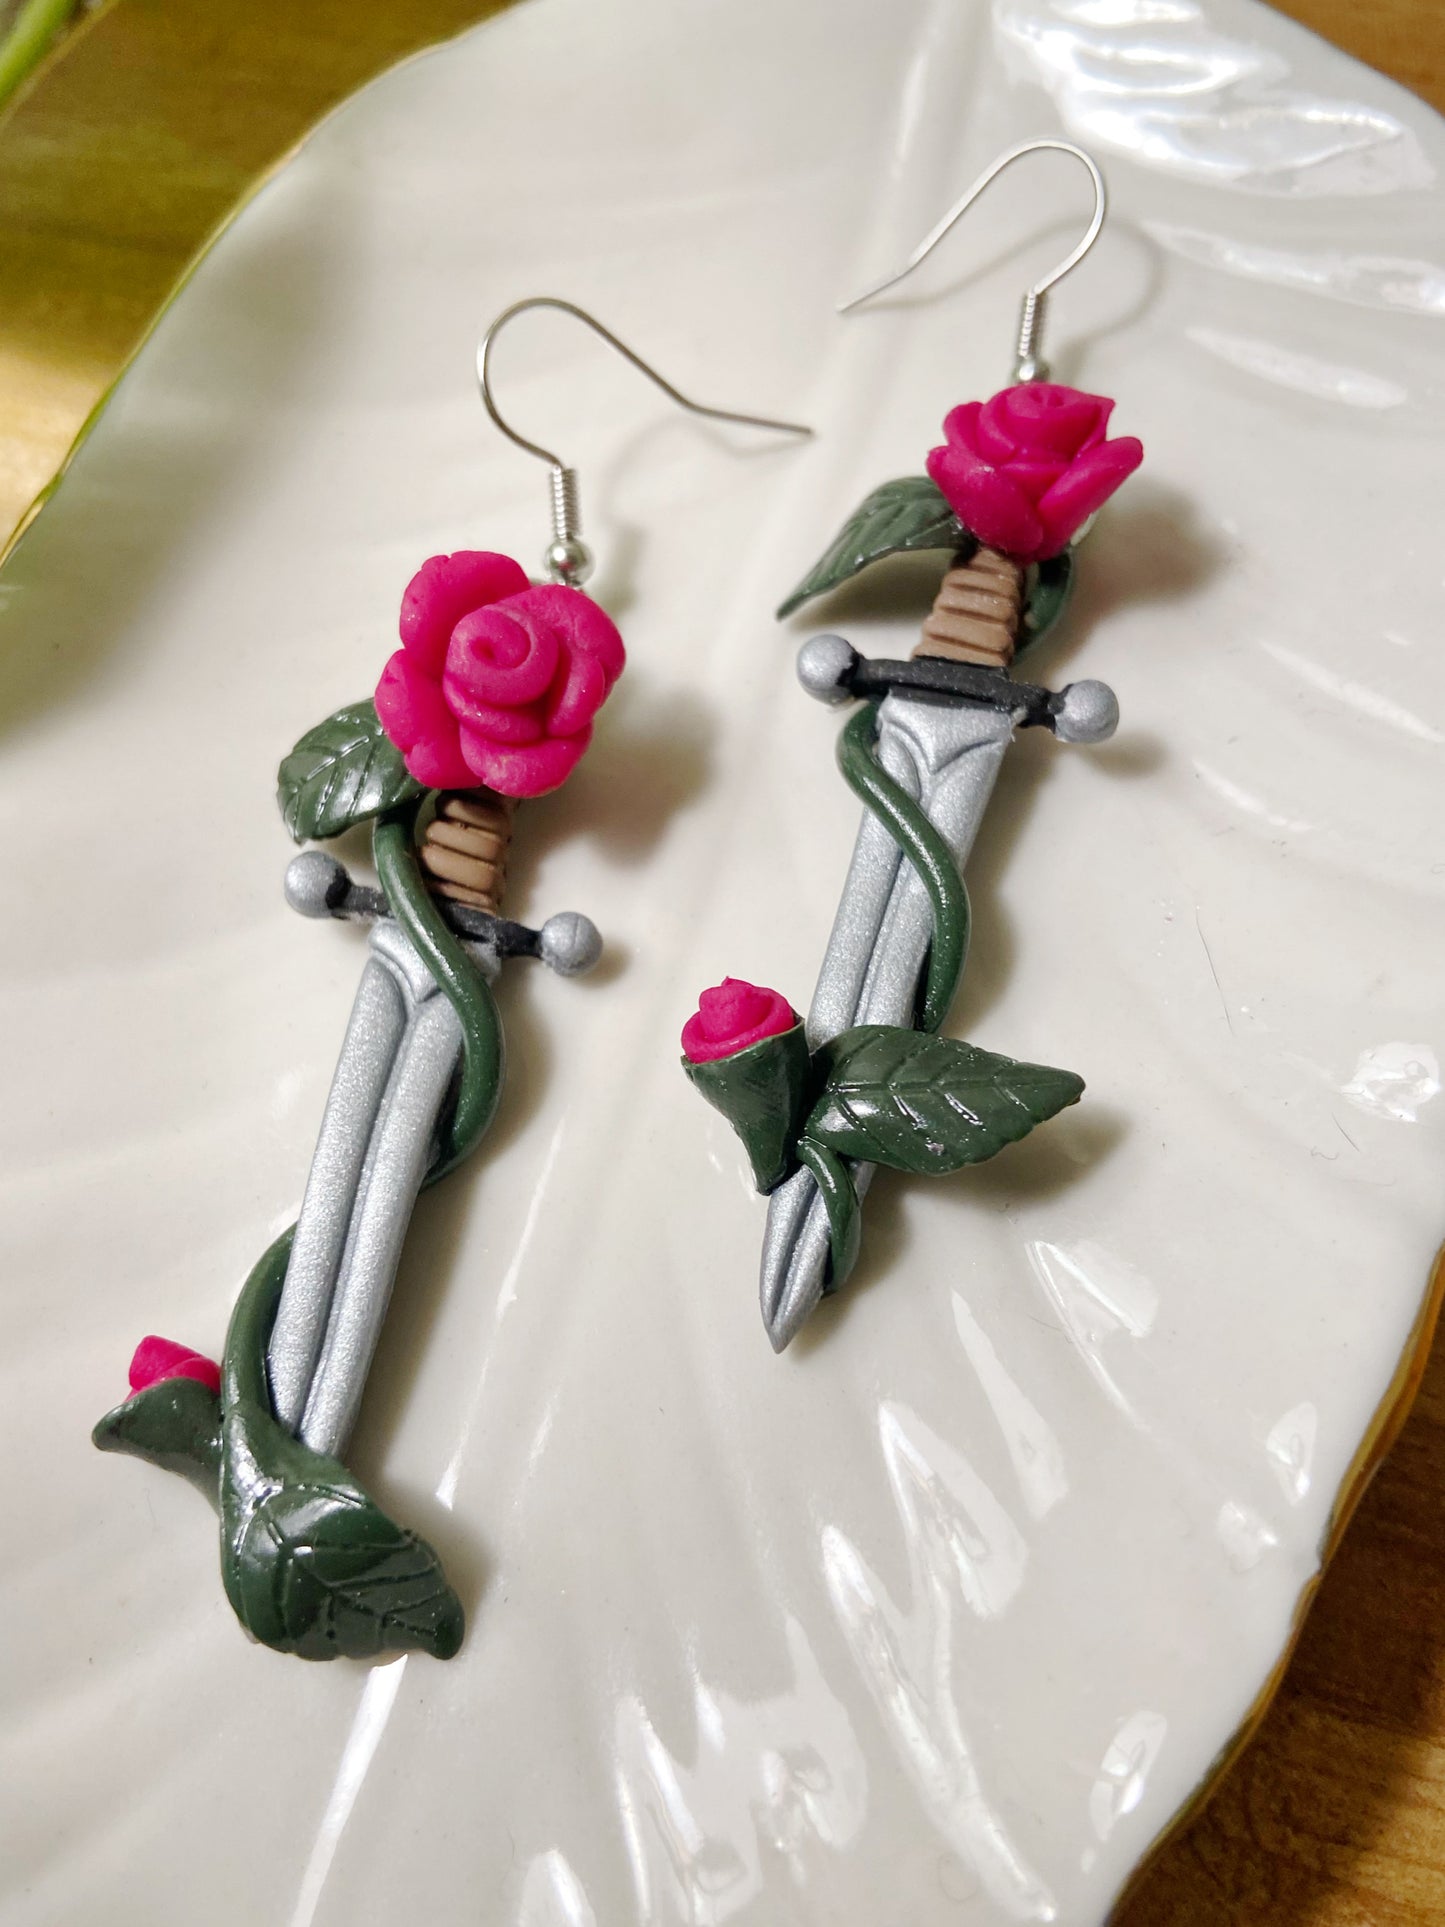 Sculpted Swords- Hot pink rose handmade polymer clay sword earrings, novelty romance jewelry